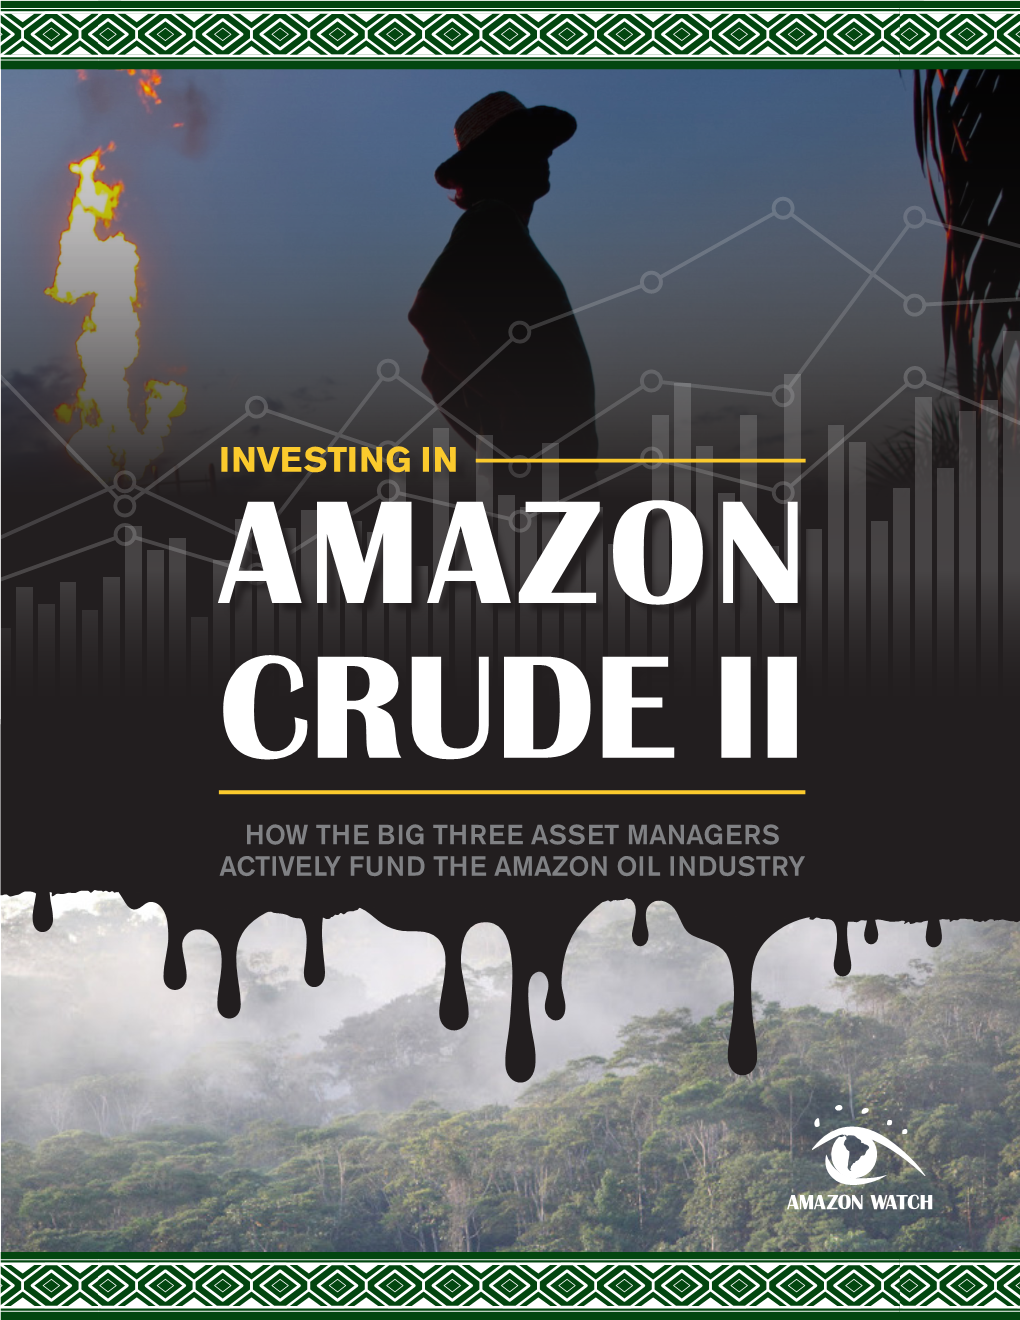 Investing in Amazon Crude Ii: How the Big Three Asset Managers Actively Fund the Amazon Oil Industry 3